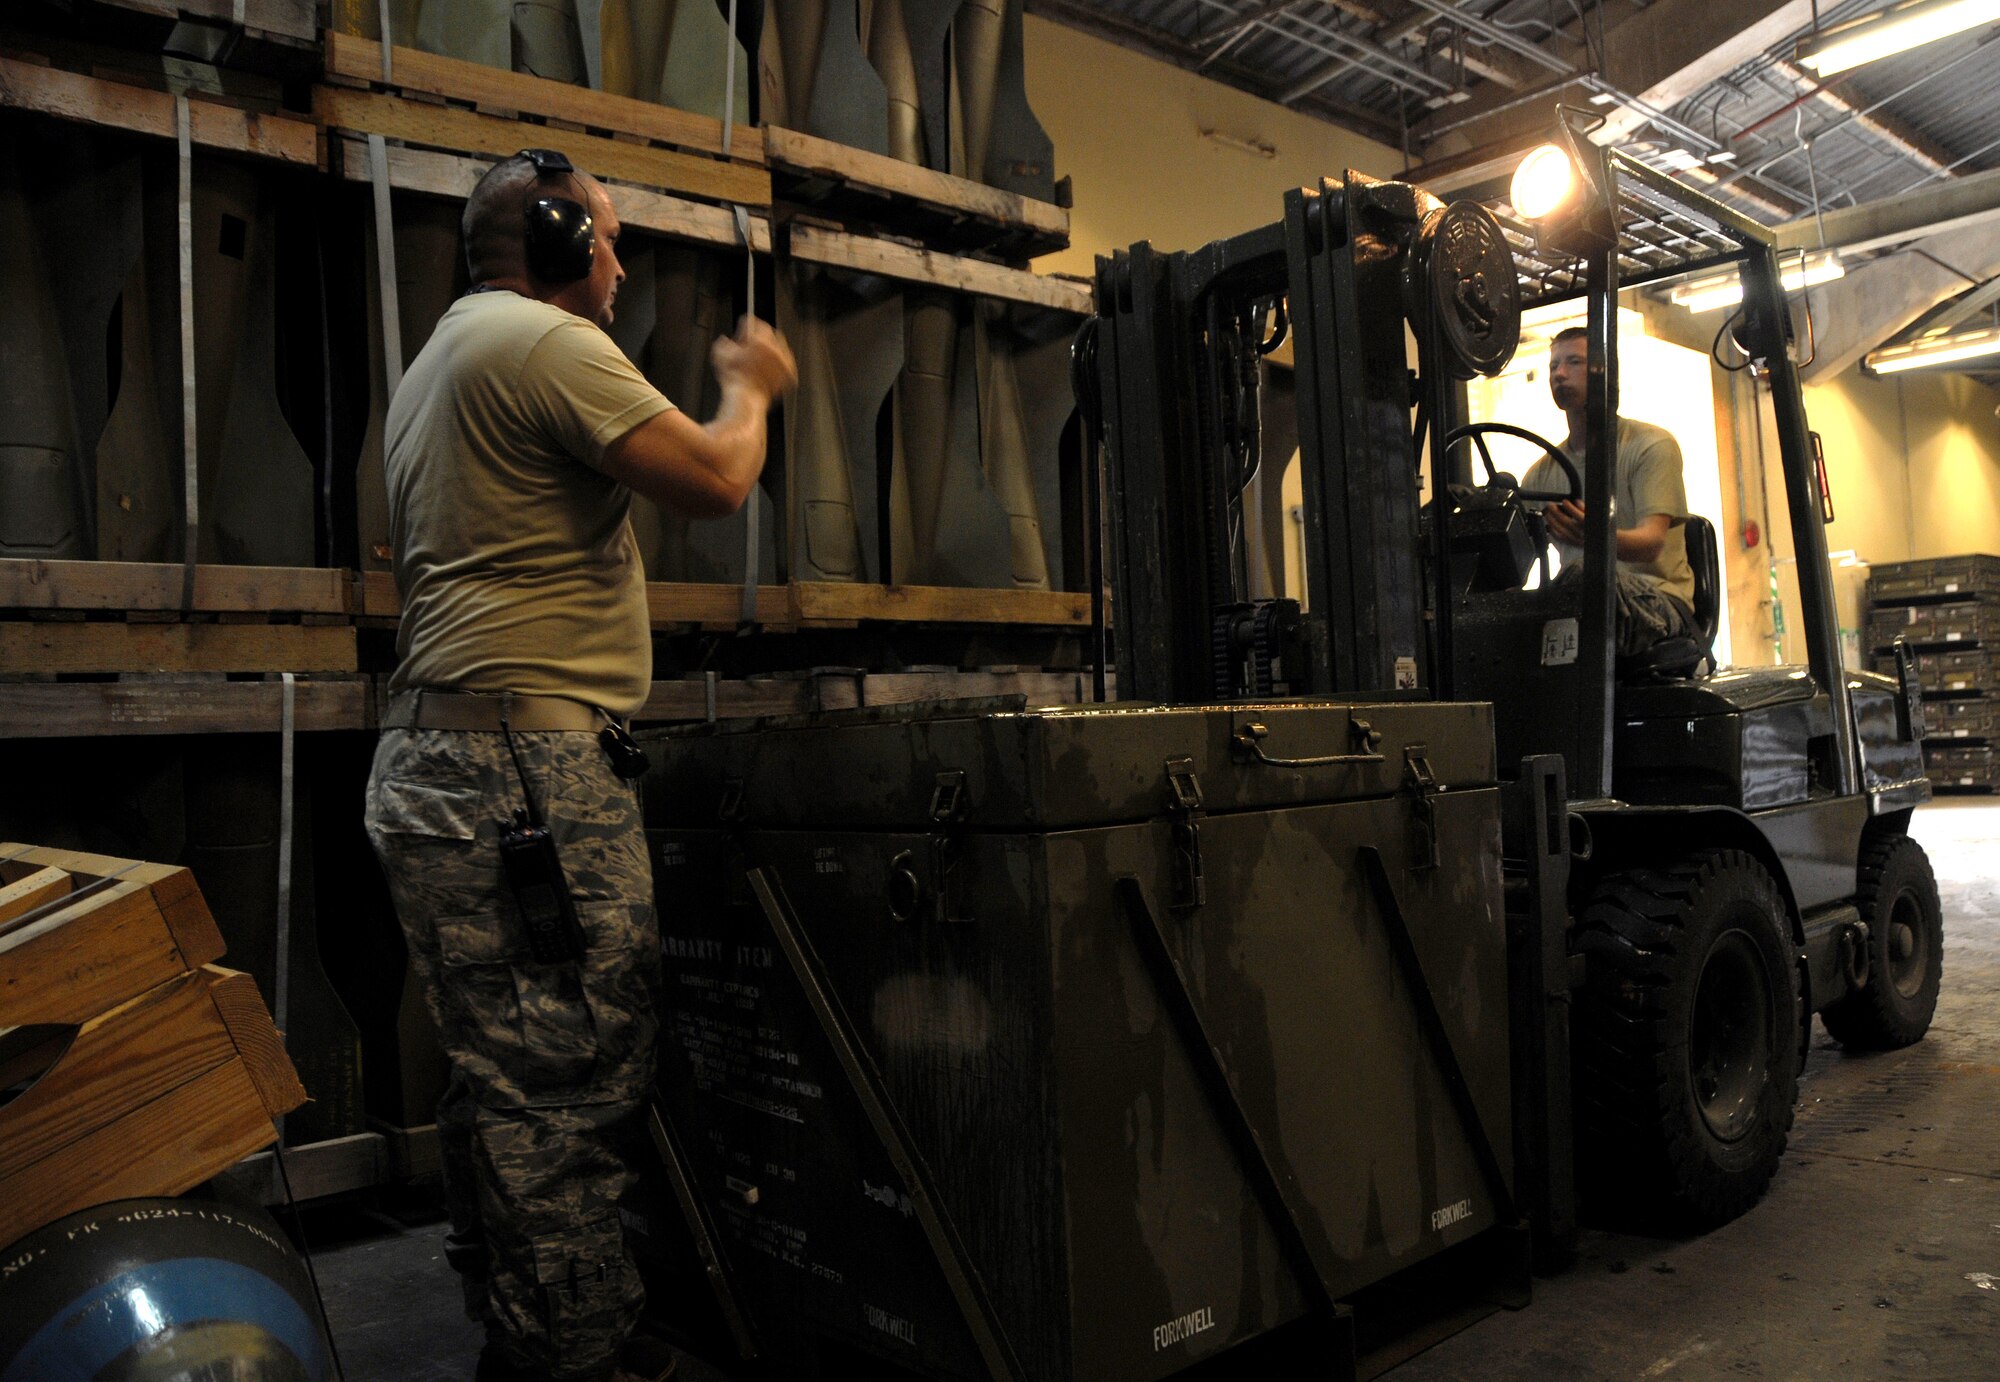 ANDERSEN AIR FORCE BASE, Guam - Staff Sgt. James Spillers directs a forklift into place here Sept. 8. The squadron is responsible for a huge storage area spanning over 5,500 acres and encompassing 143 storage facilities, seven operating locations, 23 sited storage revetments and 160 unsited revetments. (U.S. Air Force photo by Airman 1st Class Courtney Witt)